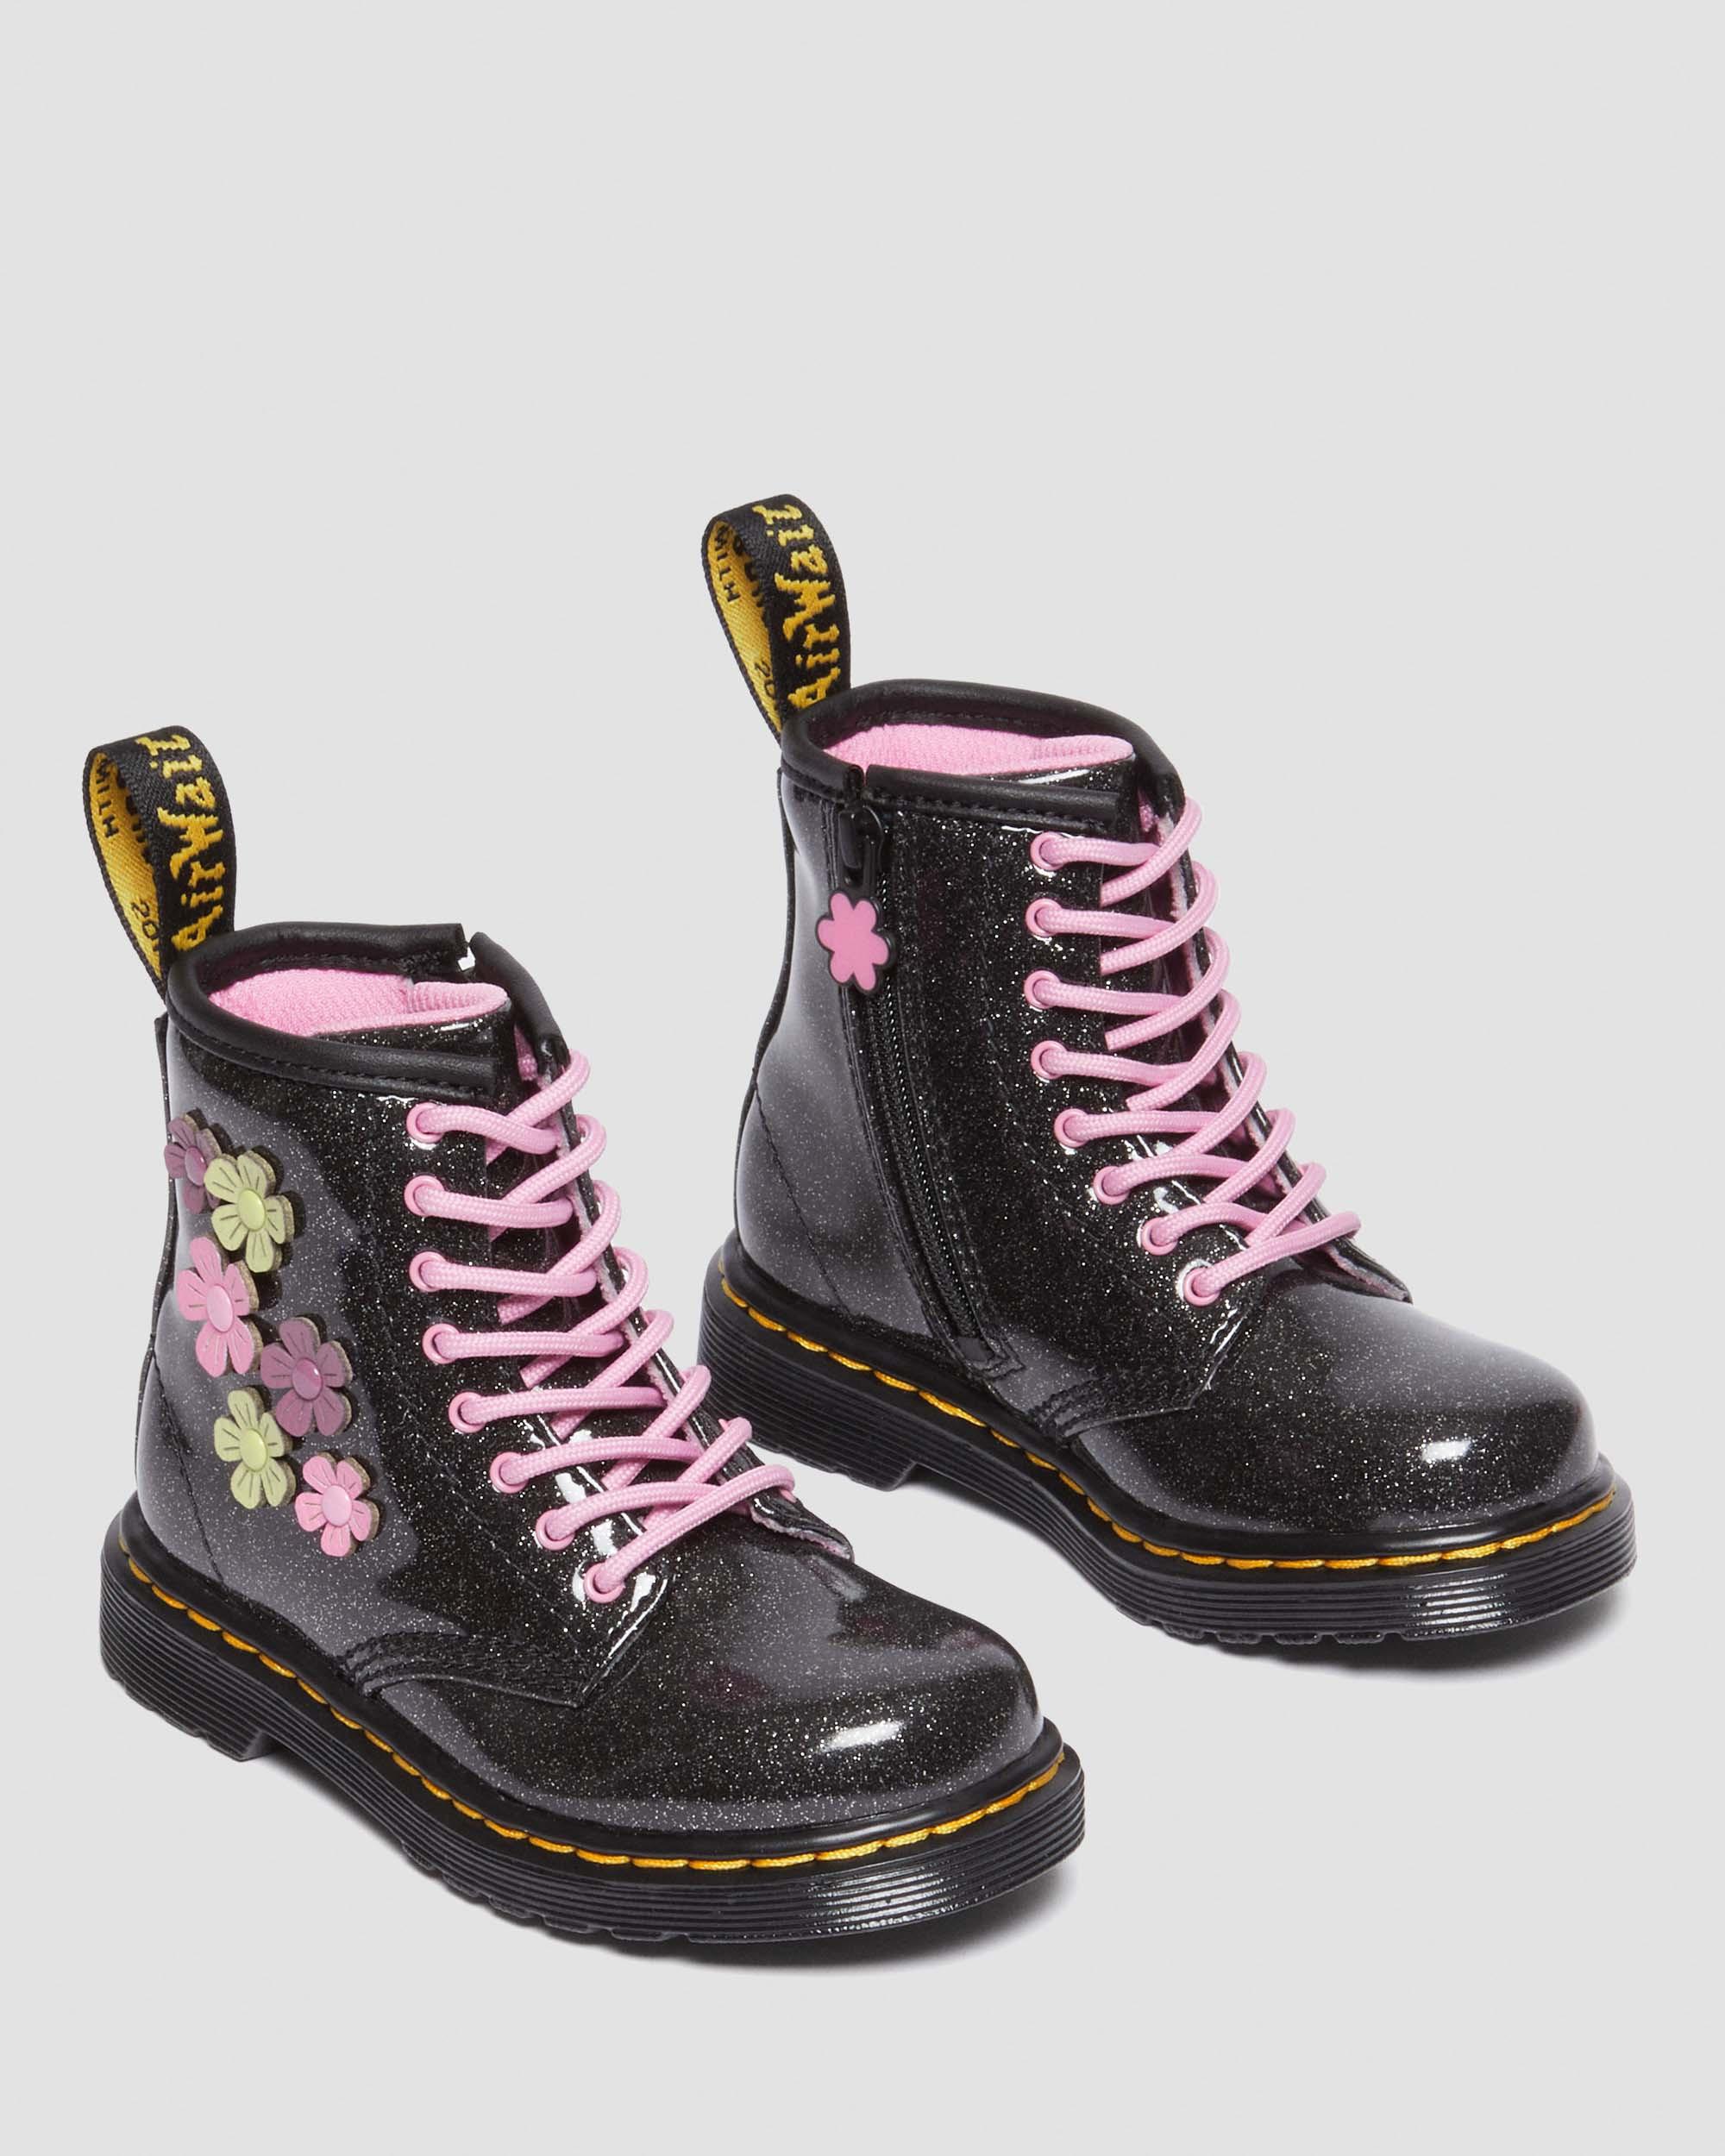 Toddler 1460 Glitter & Flower Applique Lace Up Boots in Black+Multi